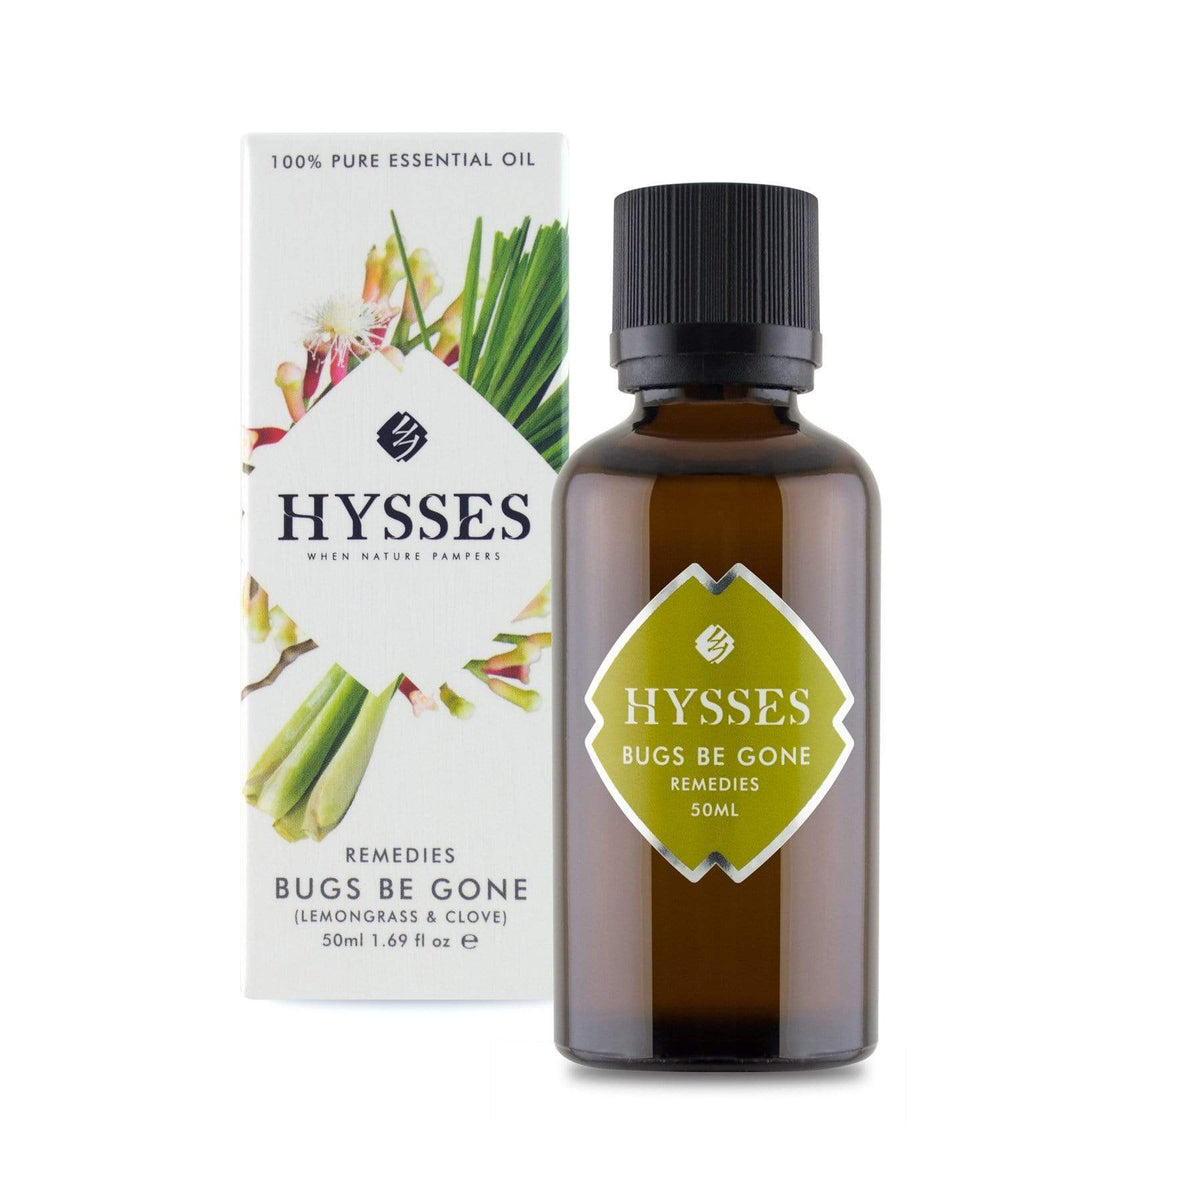 Hysses Essential Oil 50ml Remedies, Bugs Be Gone